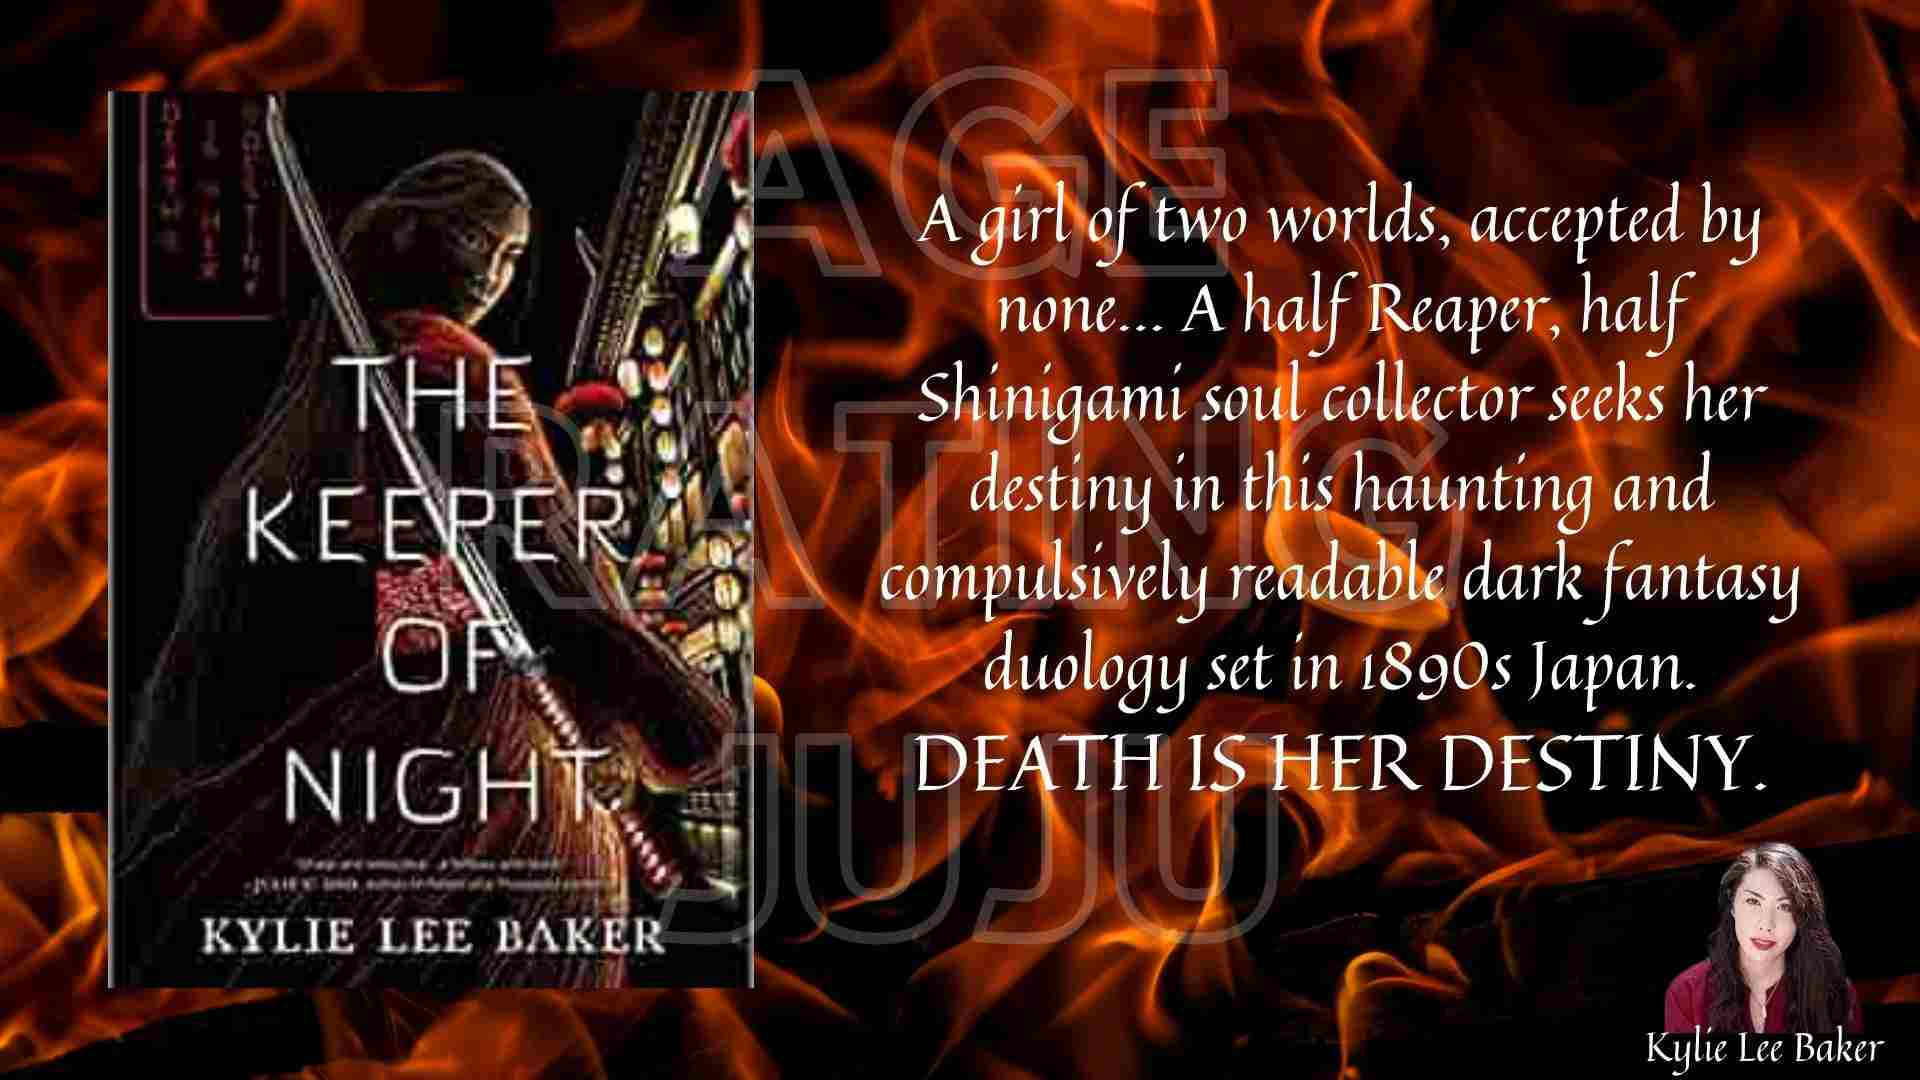 The Keeper of Night Age Rating, Parents Guide, Characters and Summary of the book 2021 the first book of The Keeper of Night Duology. A girl of two worlds, accepted by none… A half Reaper, half Shinigami soul collector seeks her destiny in this haunting and compulsively readable dark fantasy duology set in 1890s Japan. Death is her destiny.